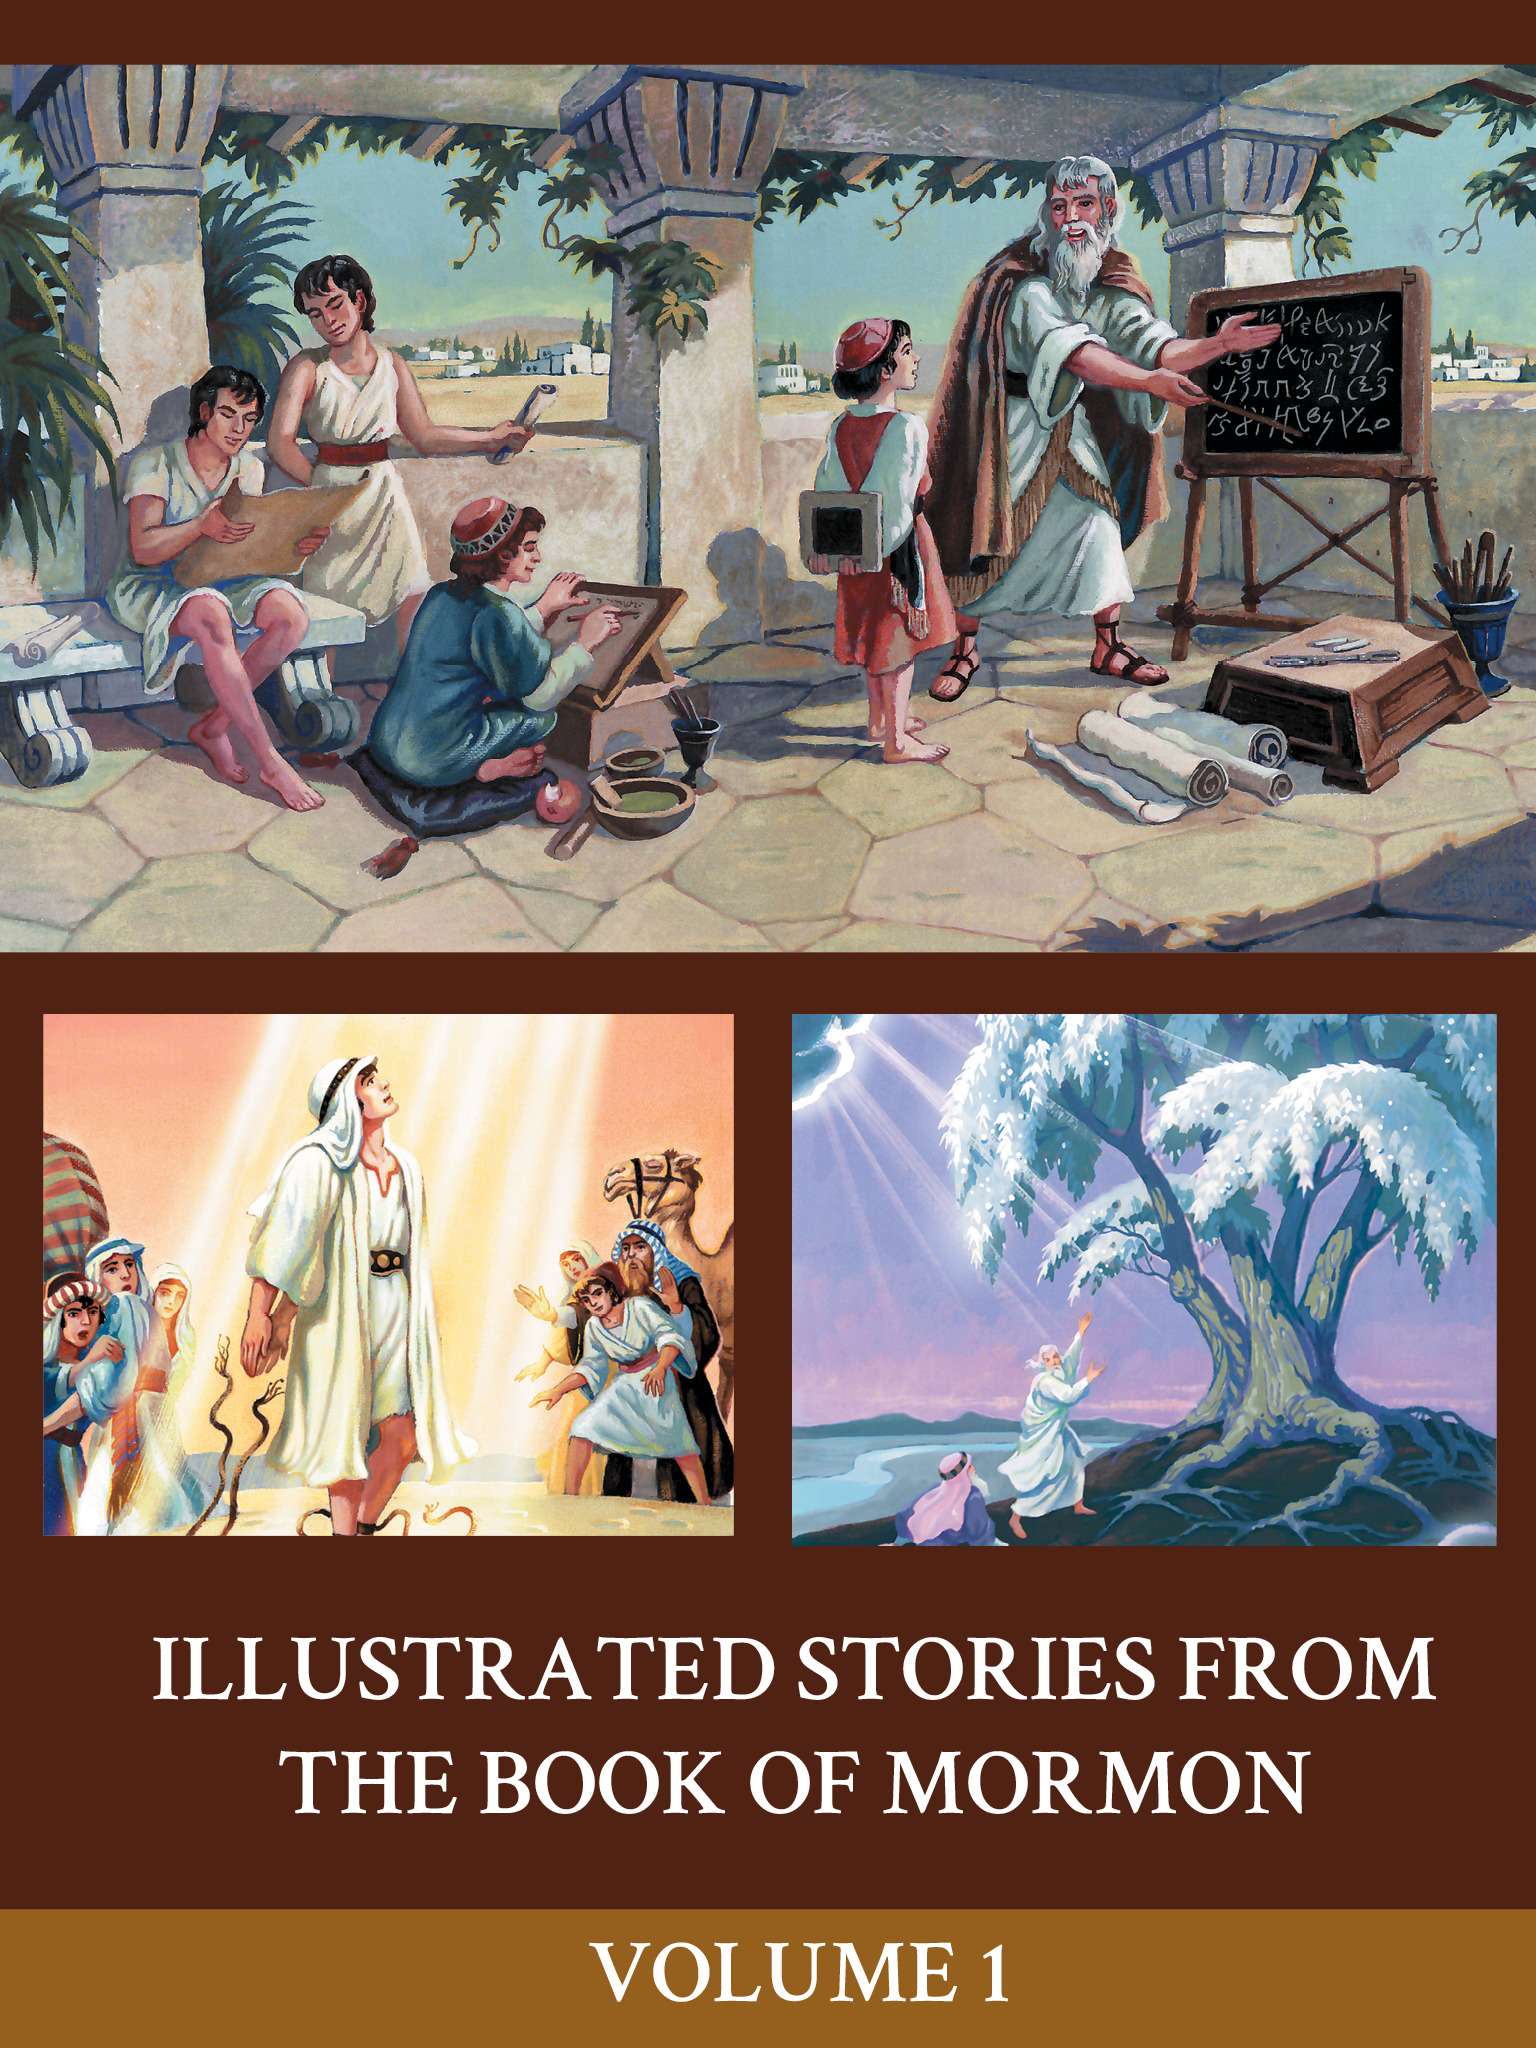 The cover art for Volume 1 of the book series Illustrated Stories from the Book of Mormon